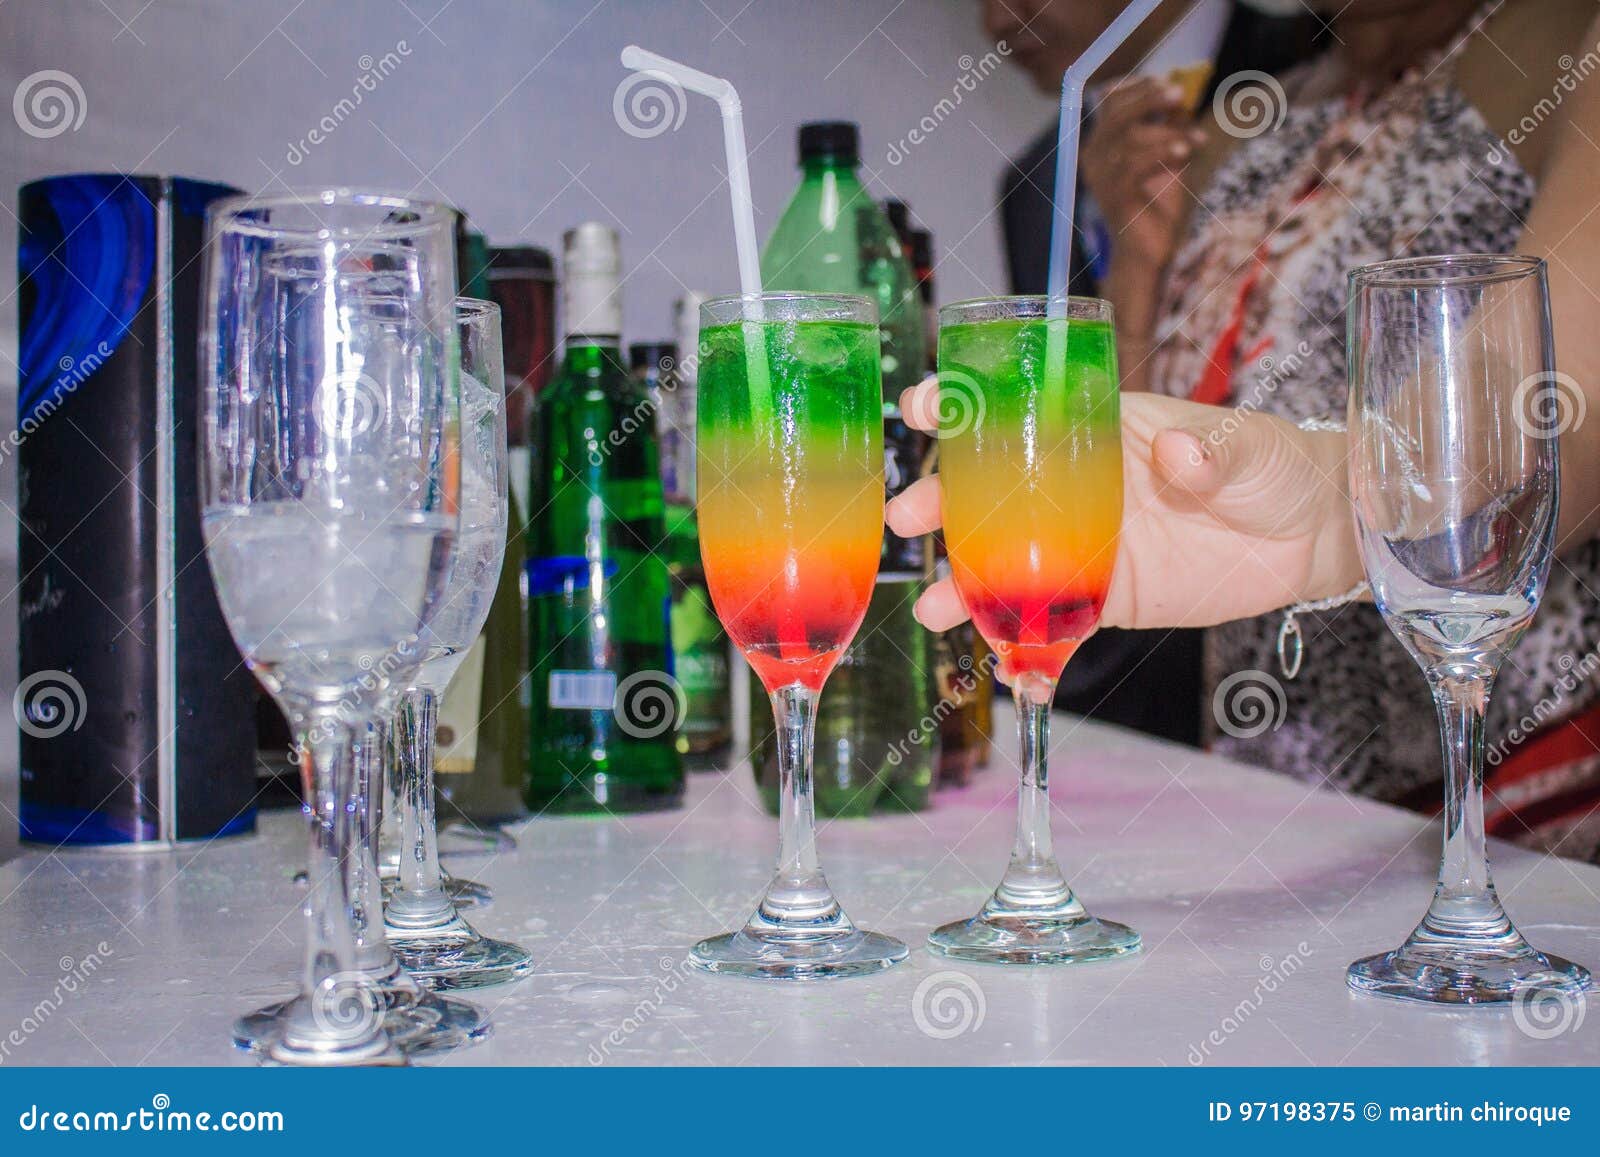 special drink for the party